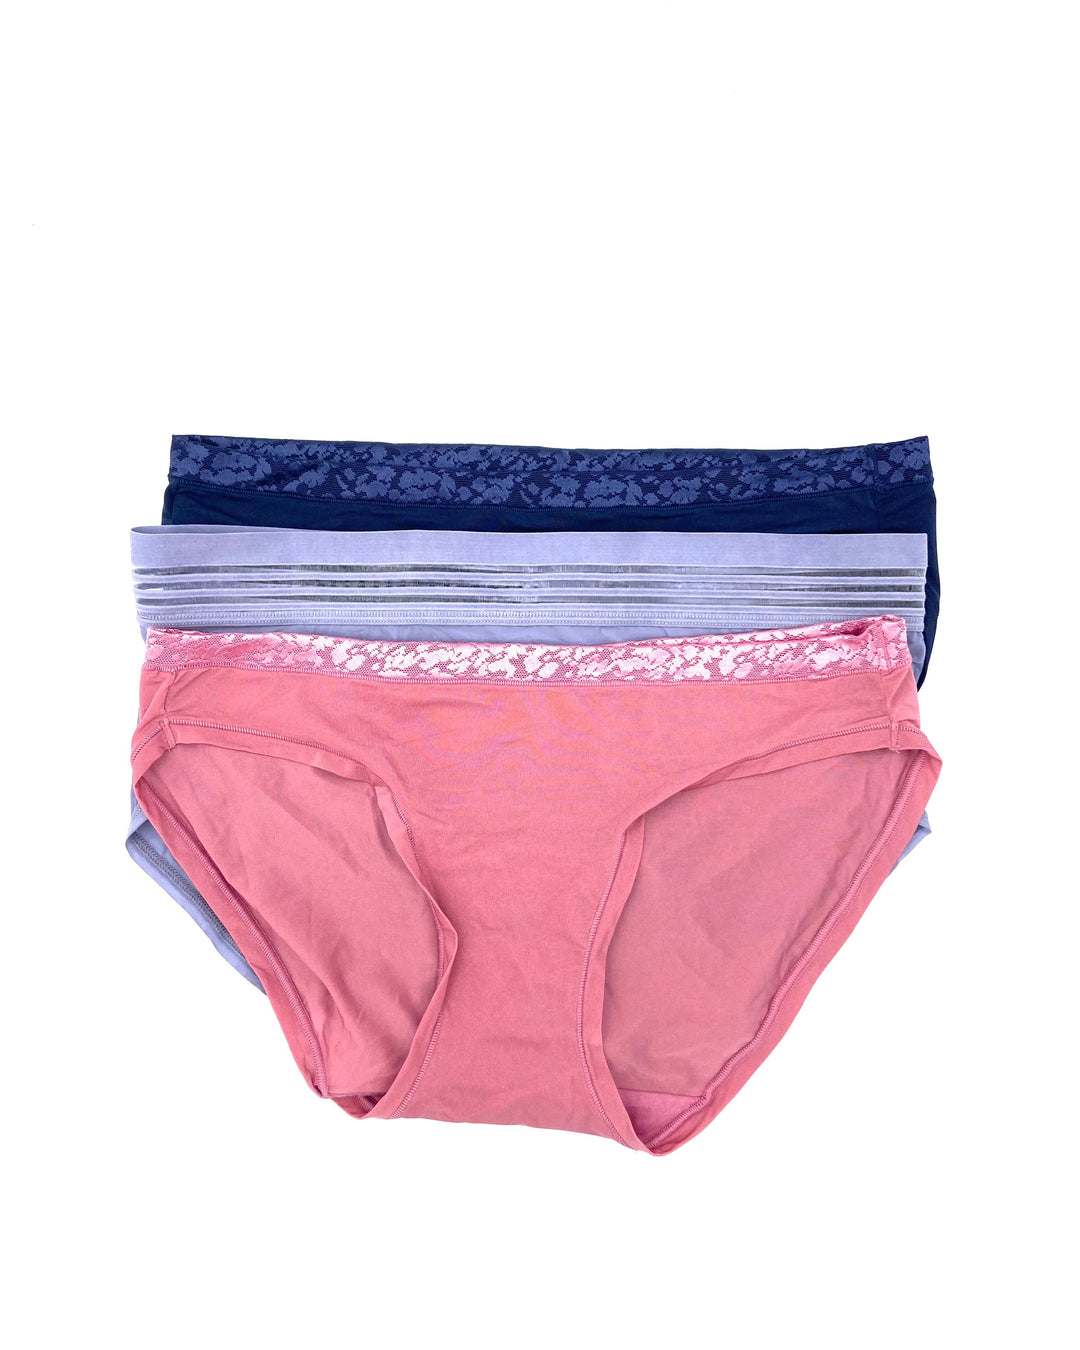 Le Mystere Underwear Brief Mystery Pack of 3 - Small